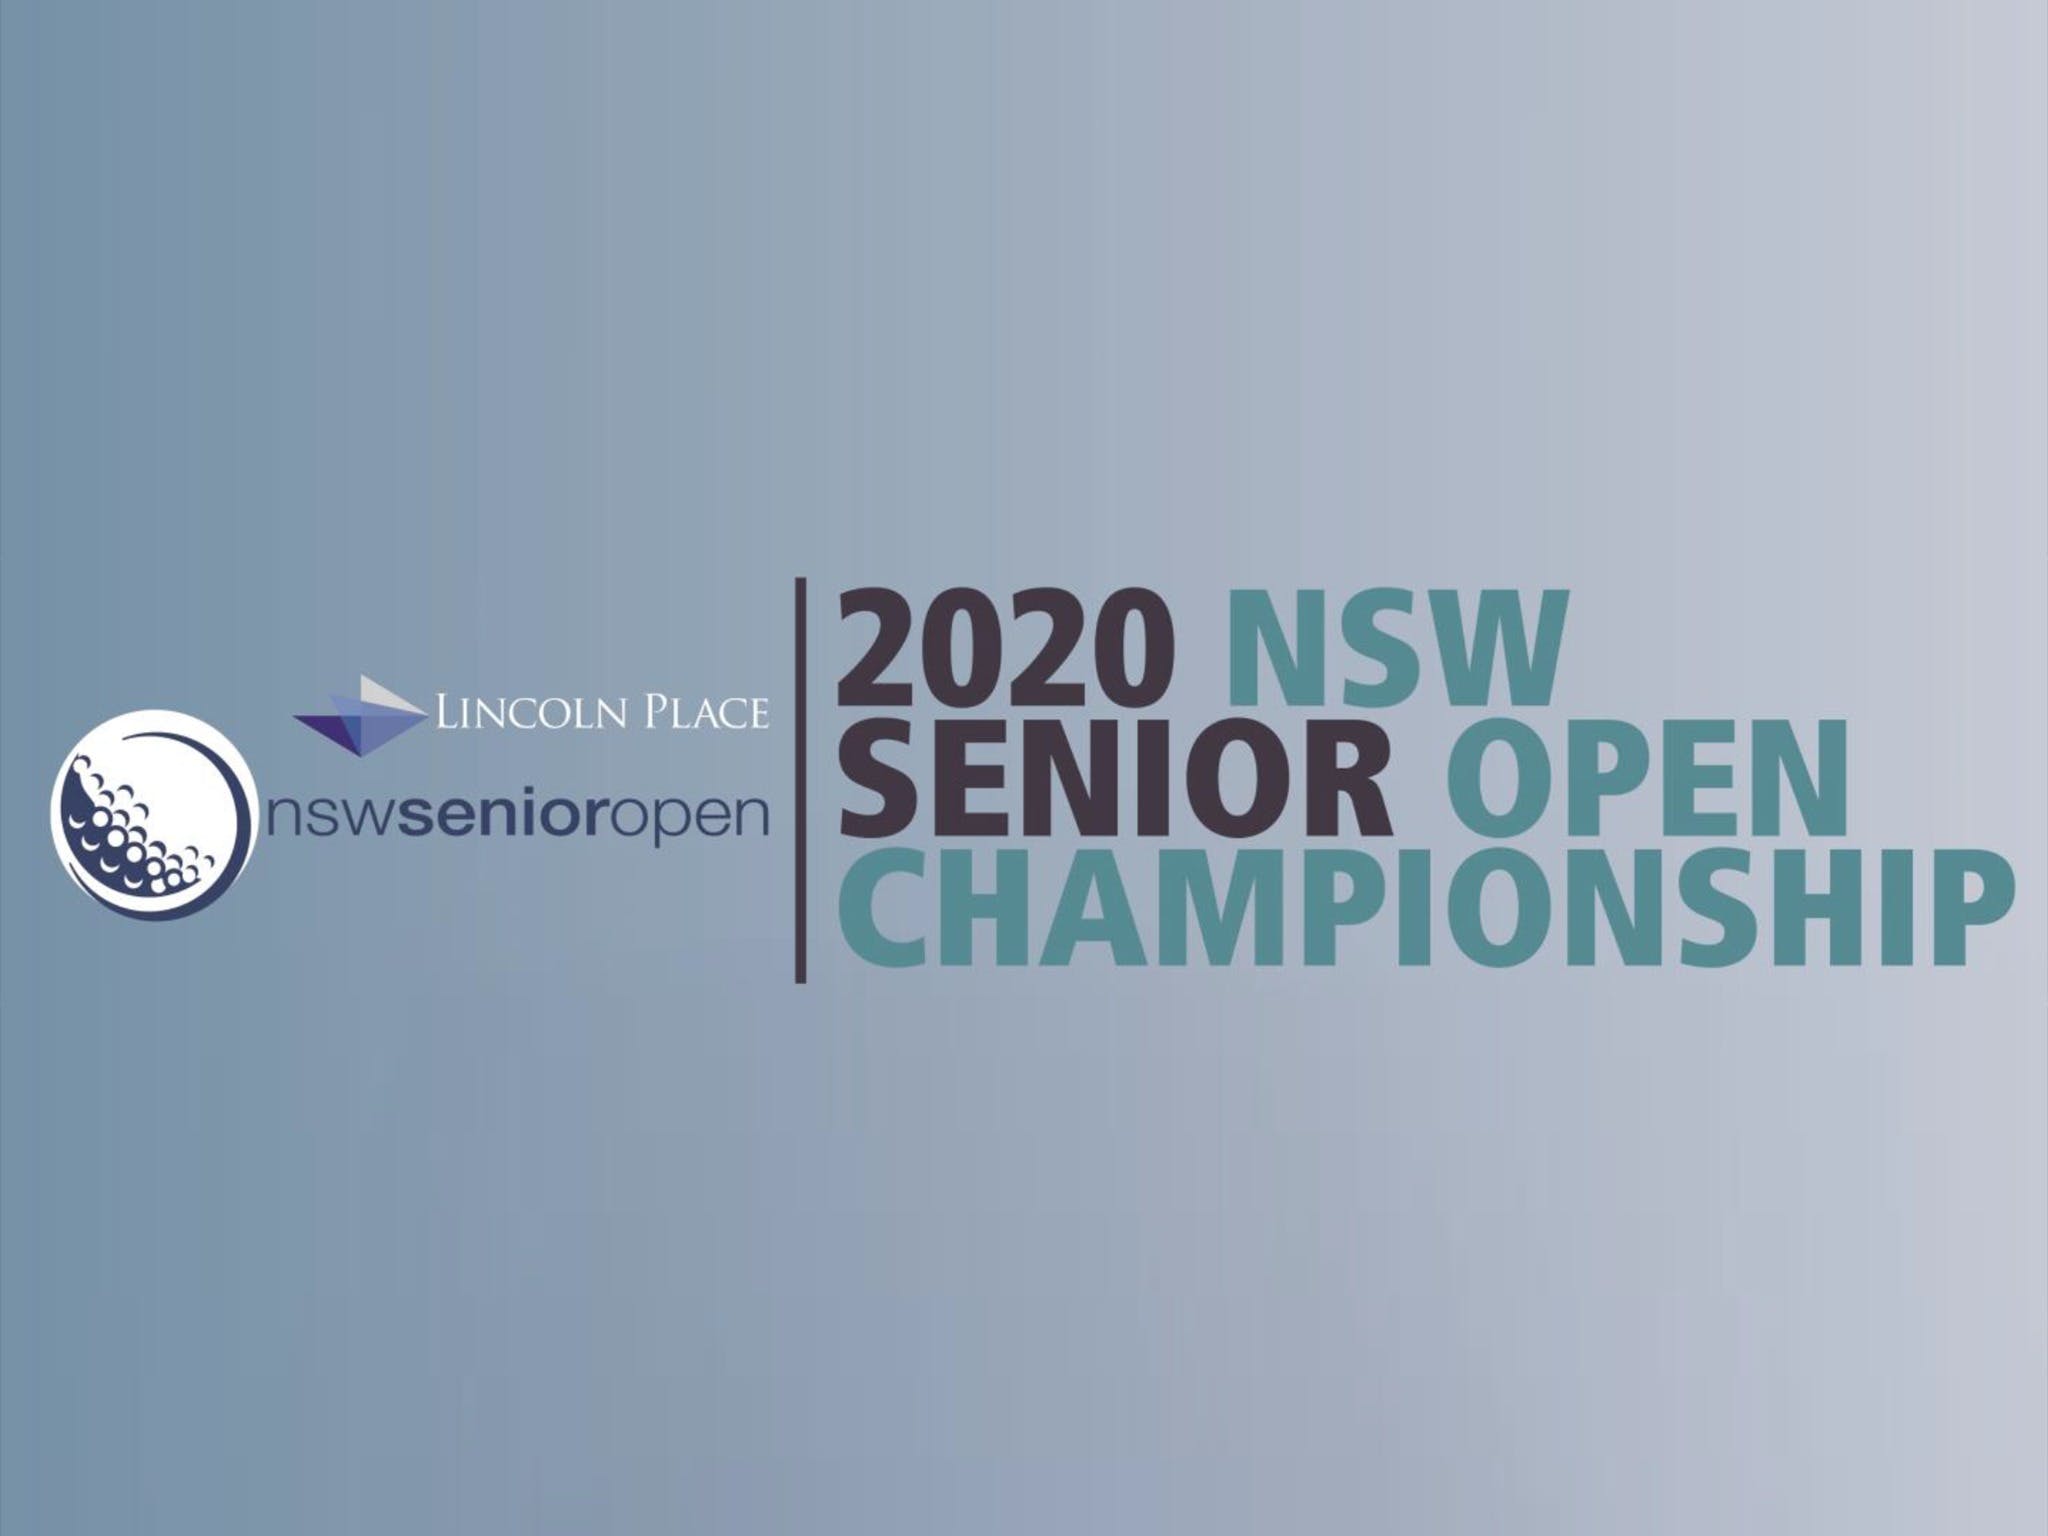 Men's NSW Senior Open - Pubs and Clubs